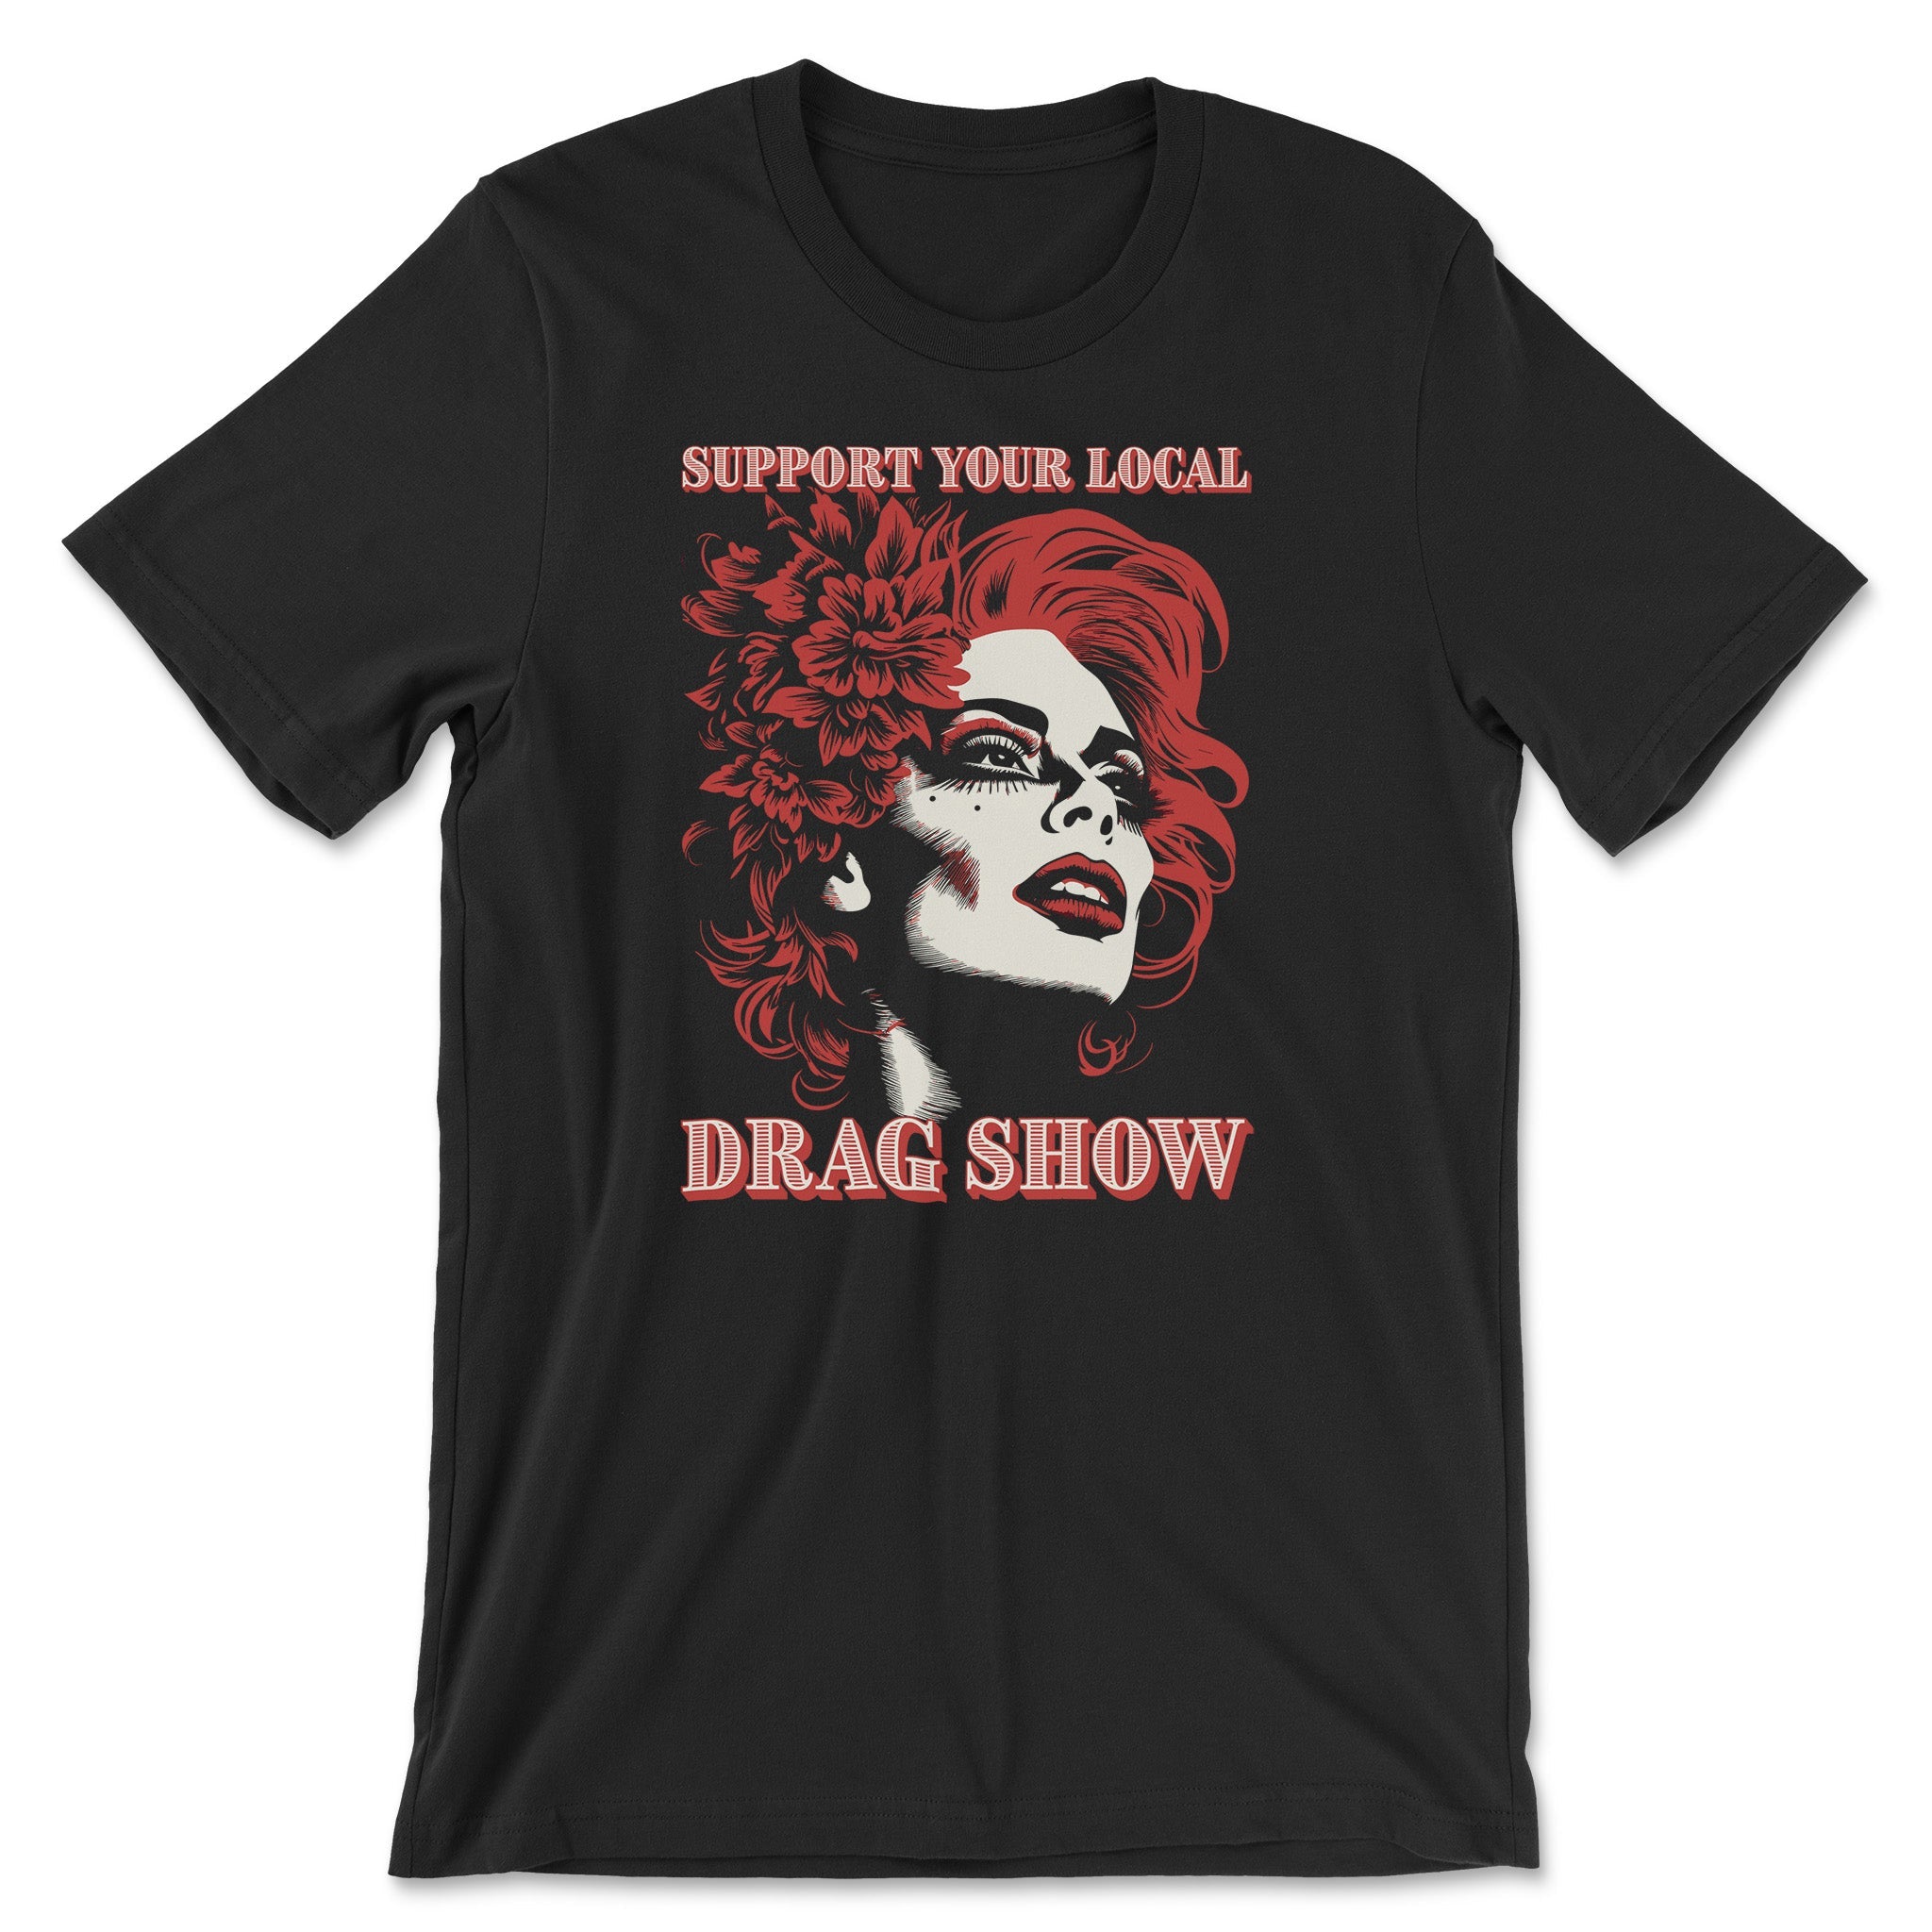 https://cdn.shopify.com/s/files/1/0735/8028/2143/products/support-your-local-drag-show-t-shirt-celebrate-drag-culture-878114.jpg?v=1692310469&width=2048